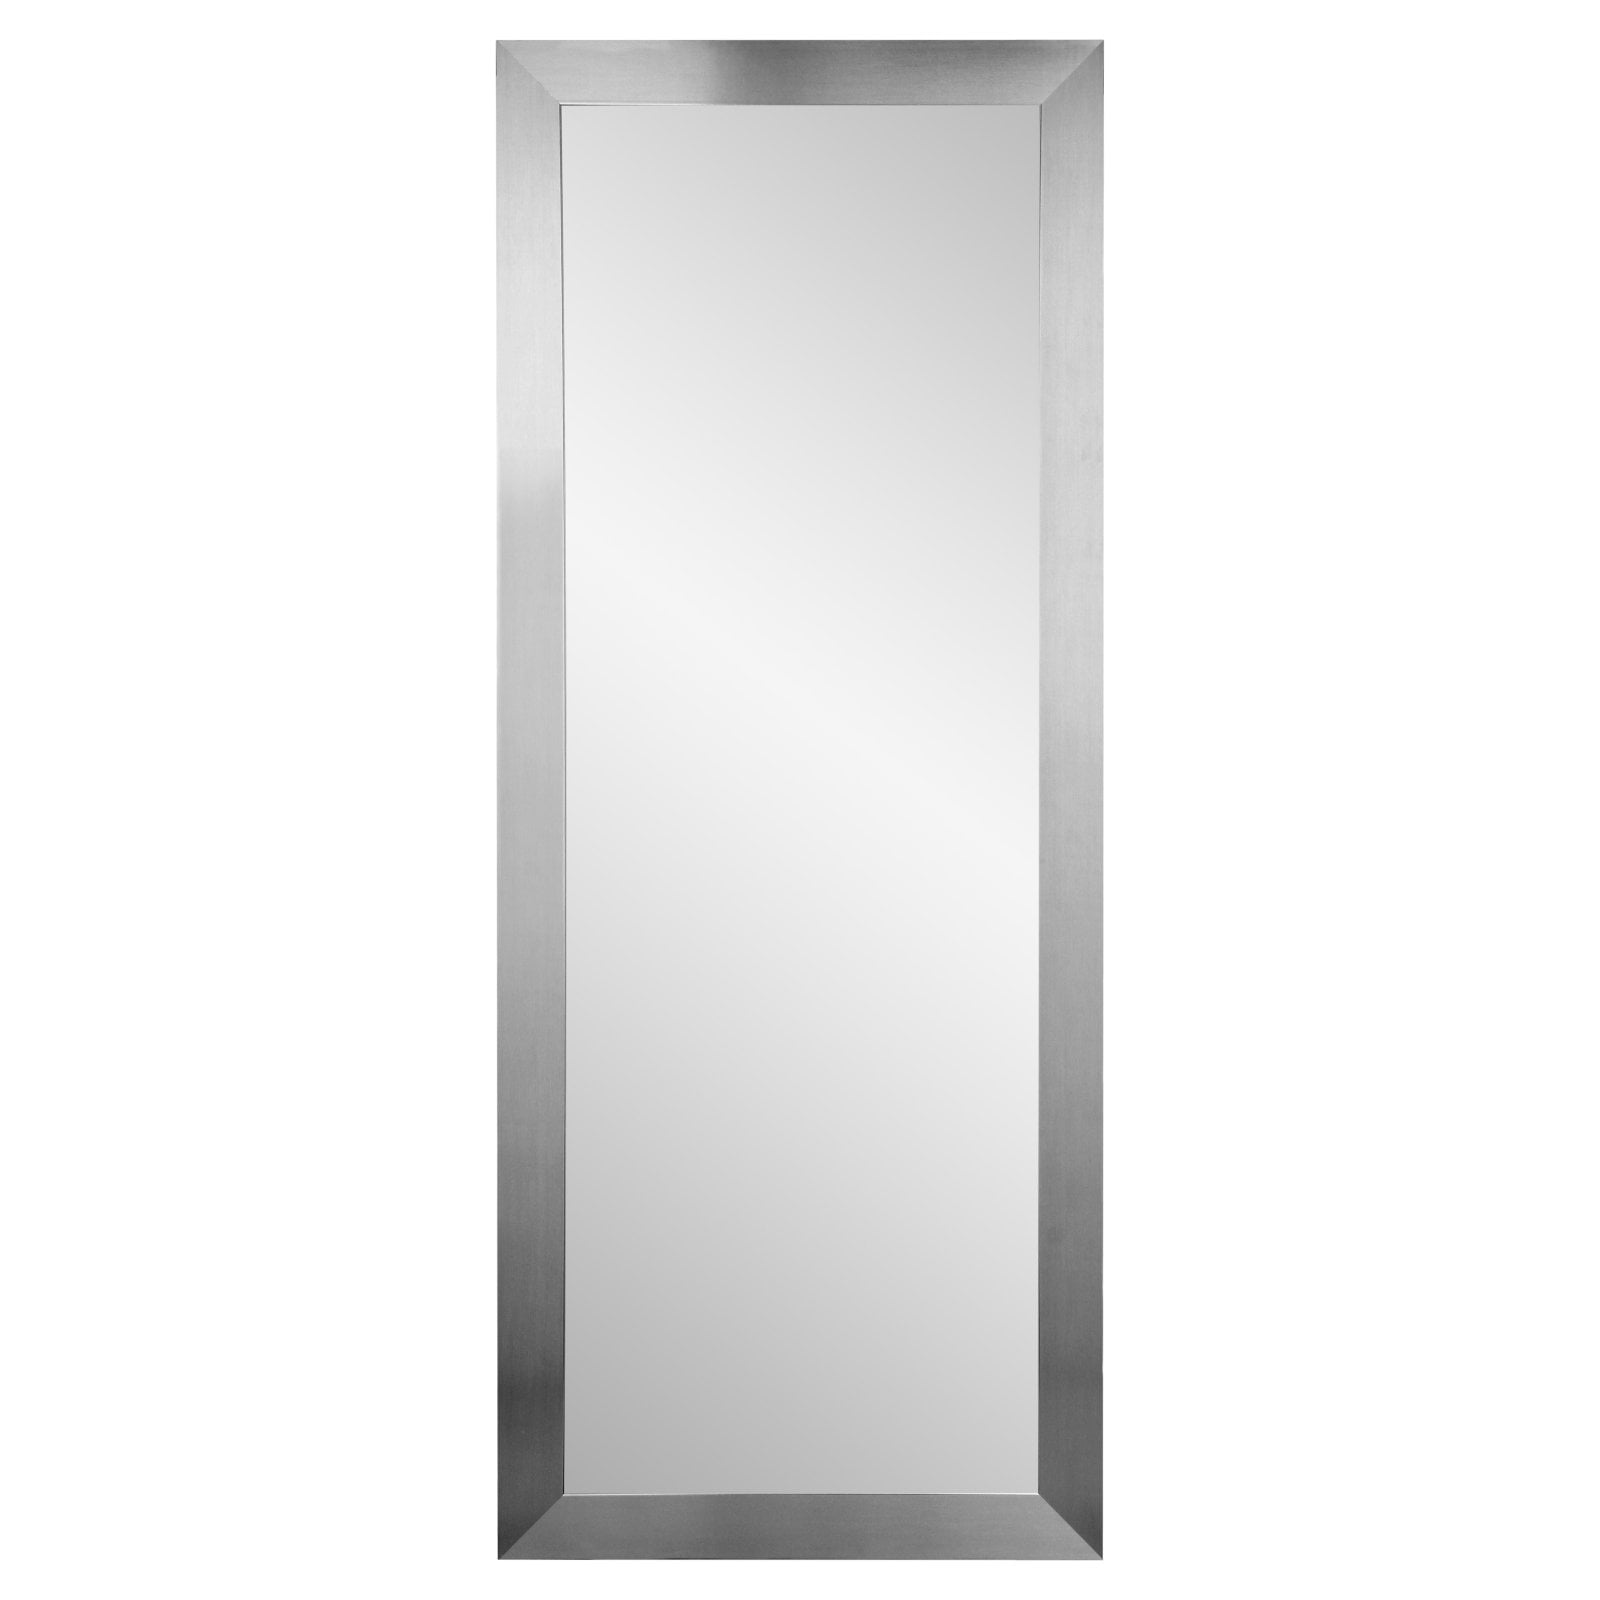 Champagne BrandtWorks Contemporary Full Length Mirror 32 x 71 